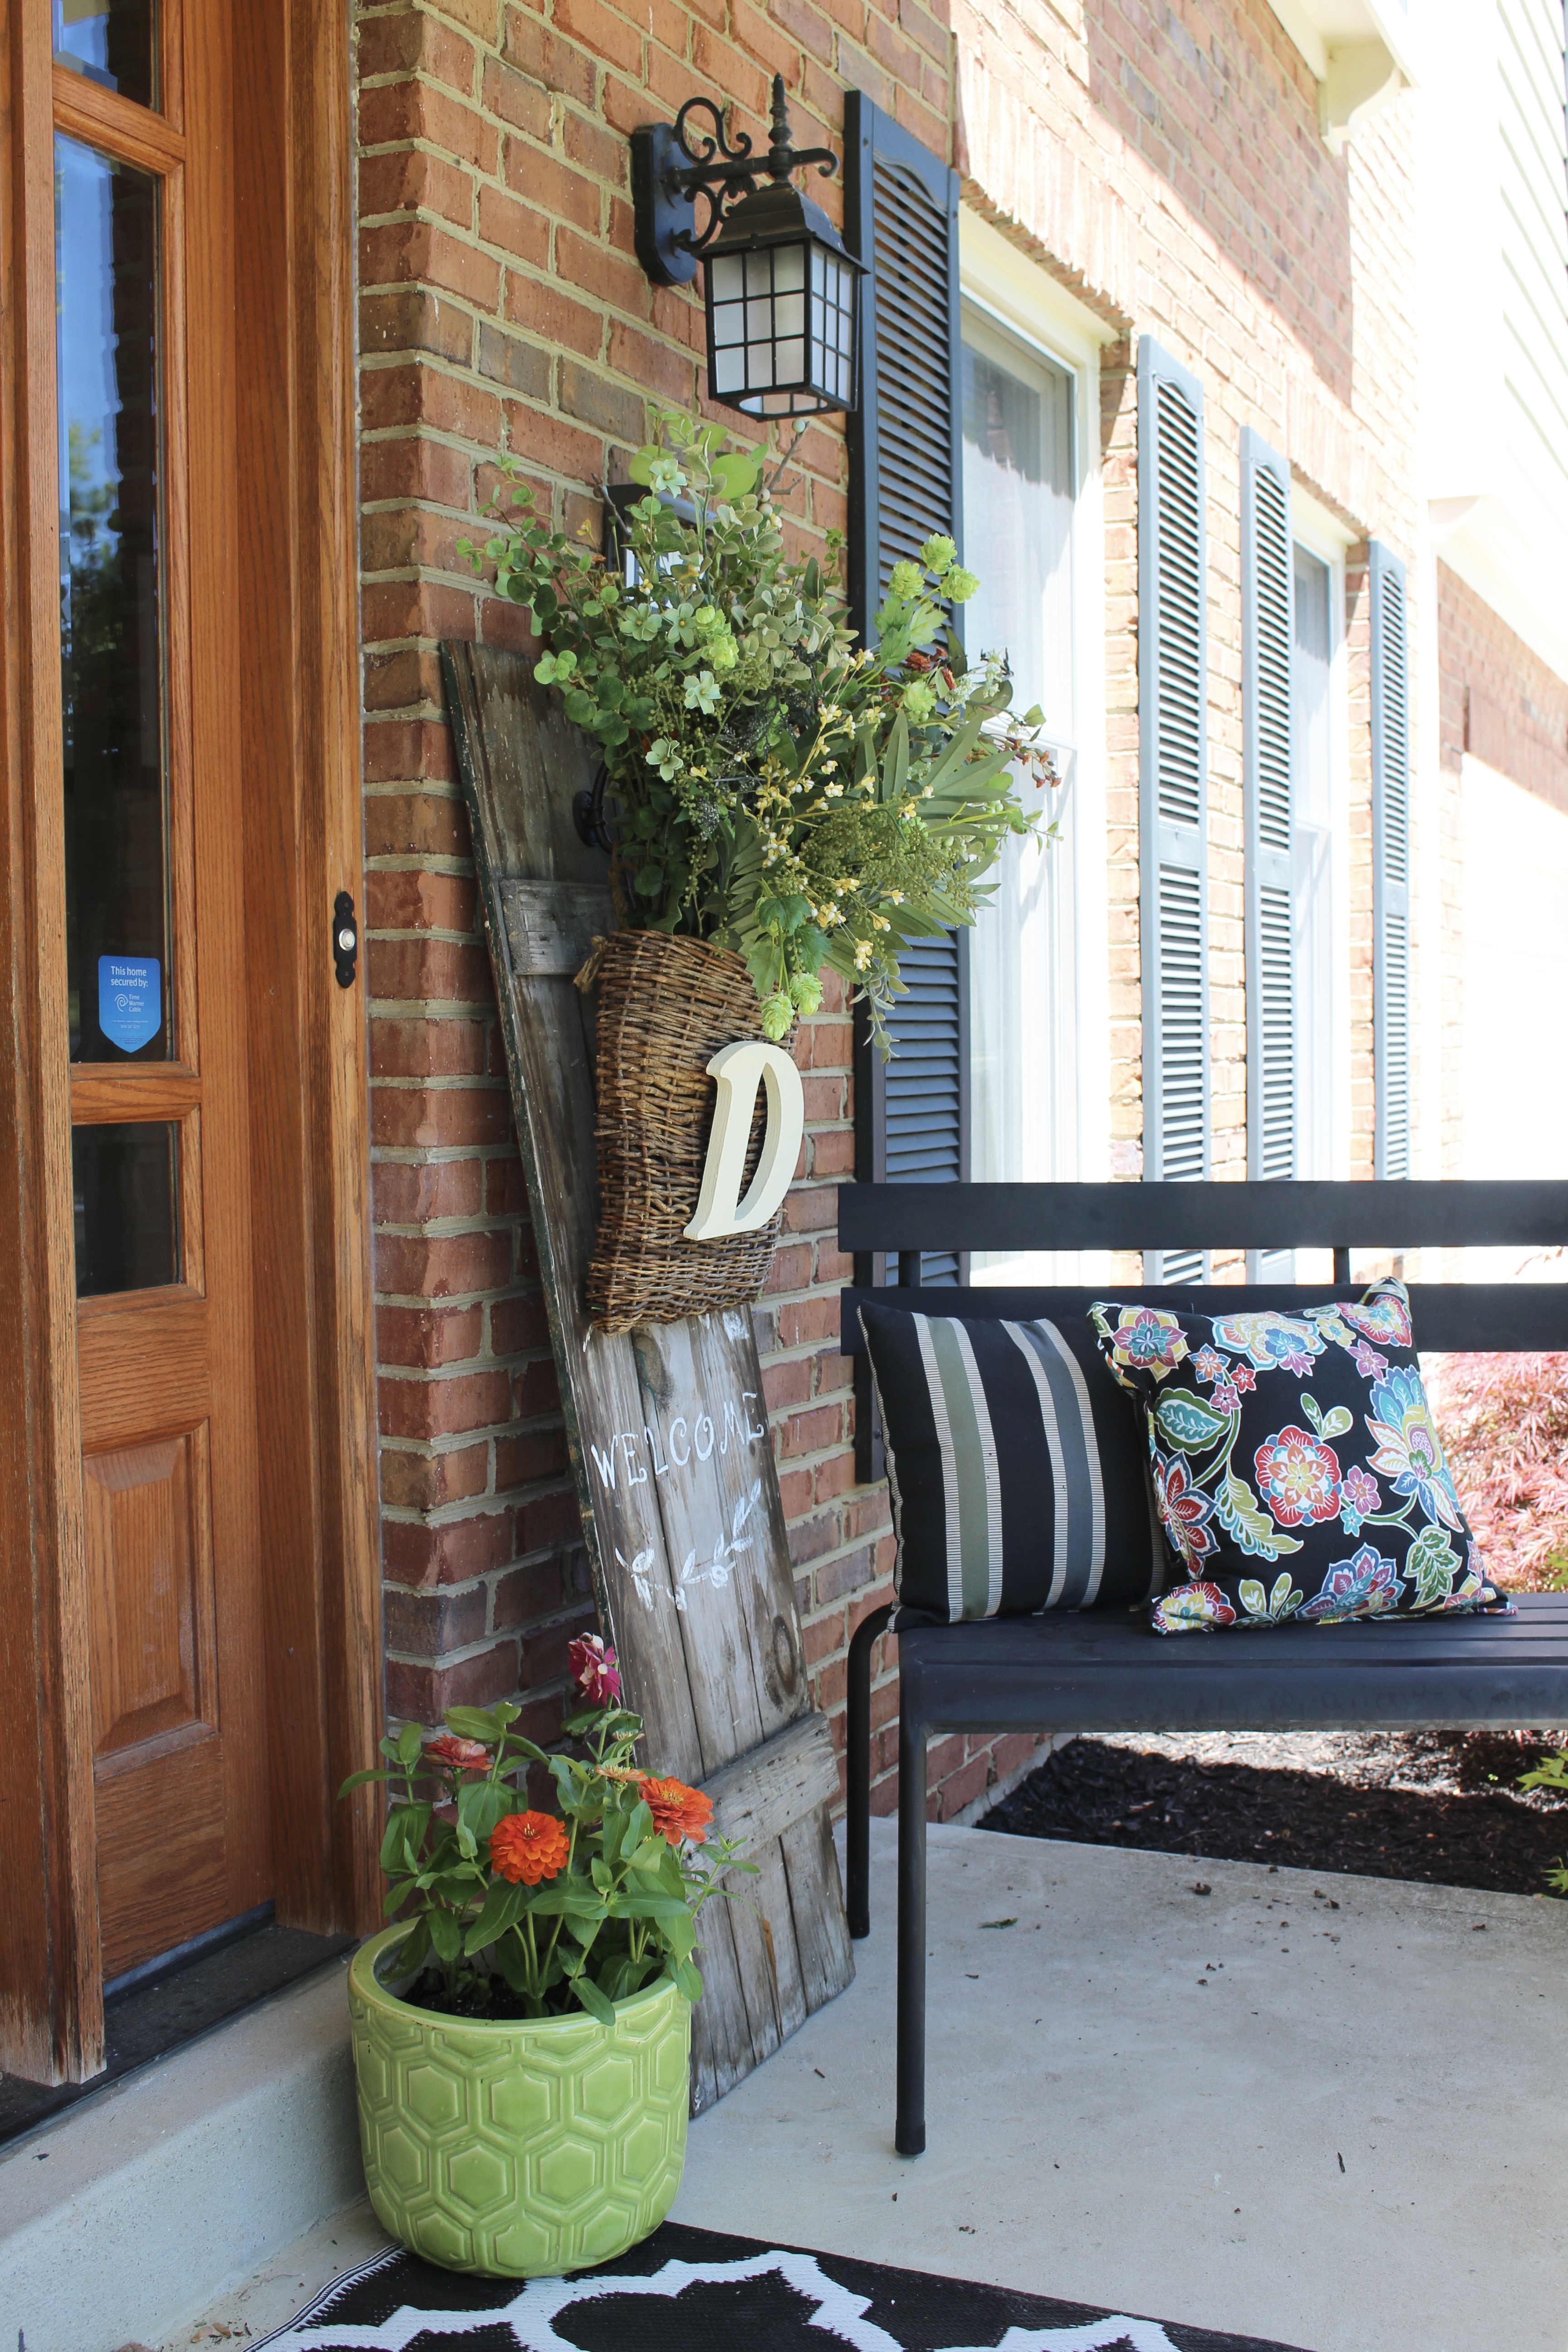 Spring Porch- Decorating for Spring- Outdoors- Flowers- Gardening- Monrovia- colorful plants- porch decor- outdoor spaces